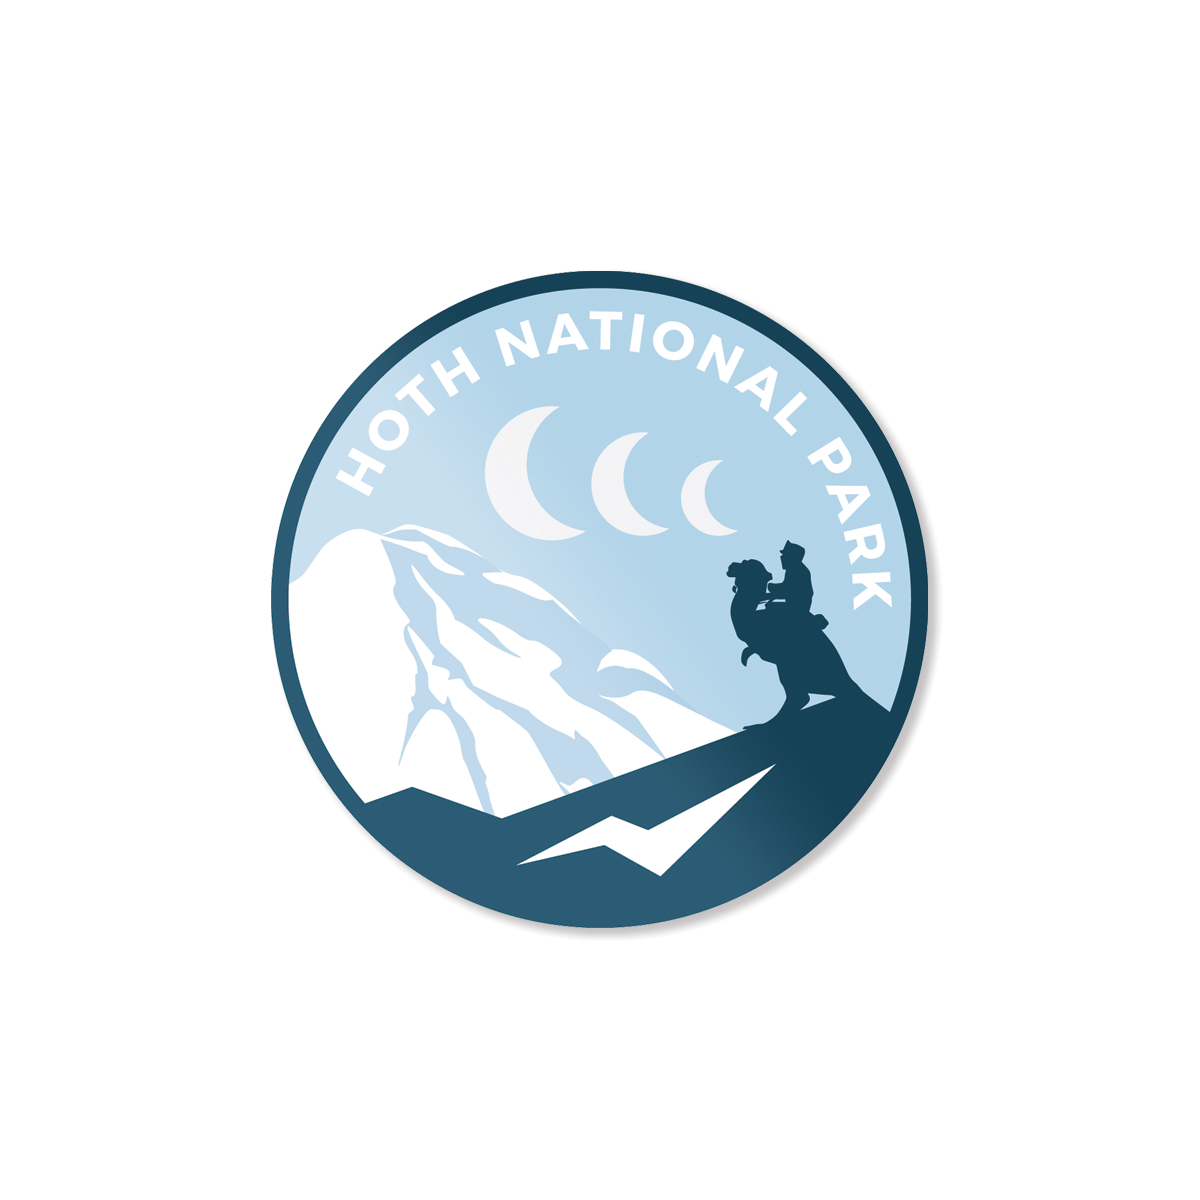 Hoth National Park Patch by The Midnight Society